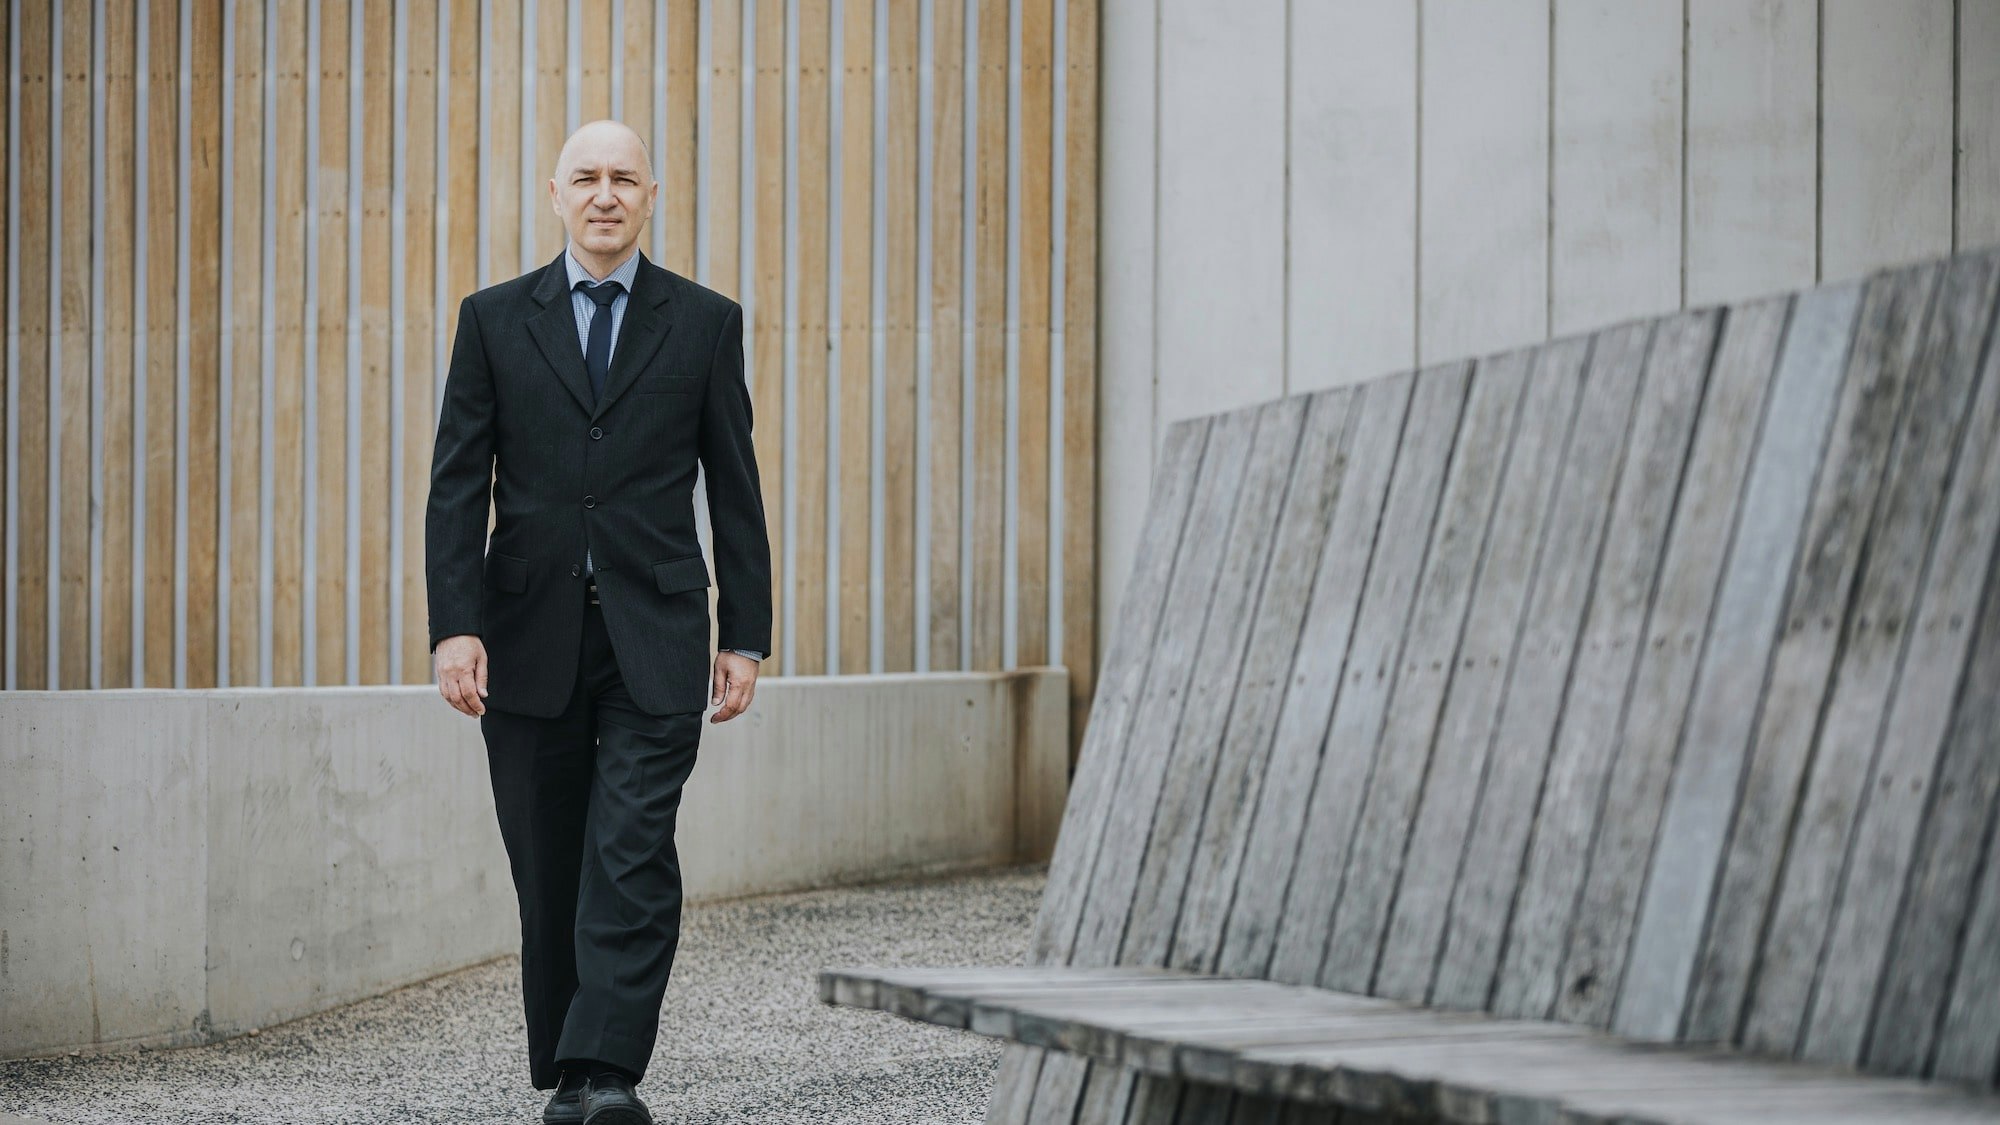 Stefan vom Bruch walking towards the camera in a suit.